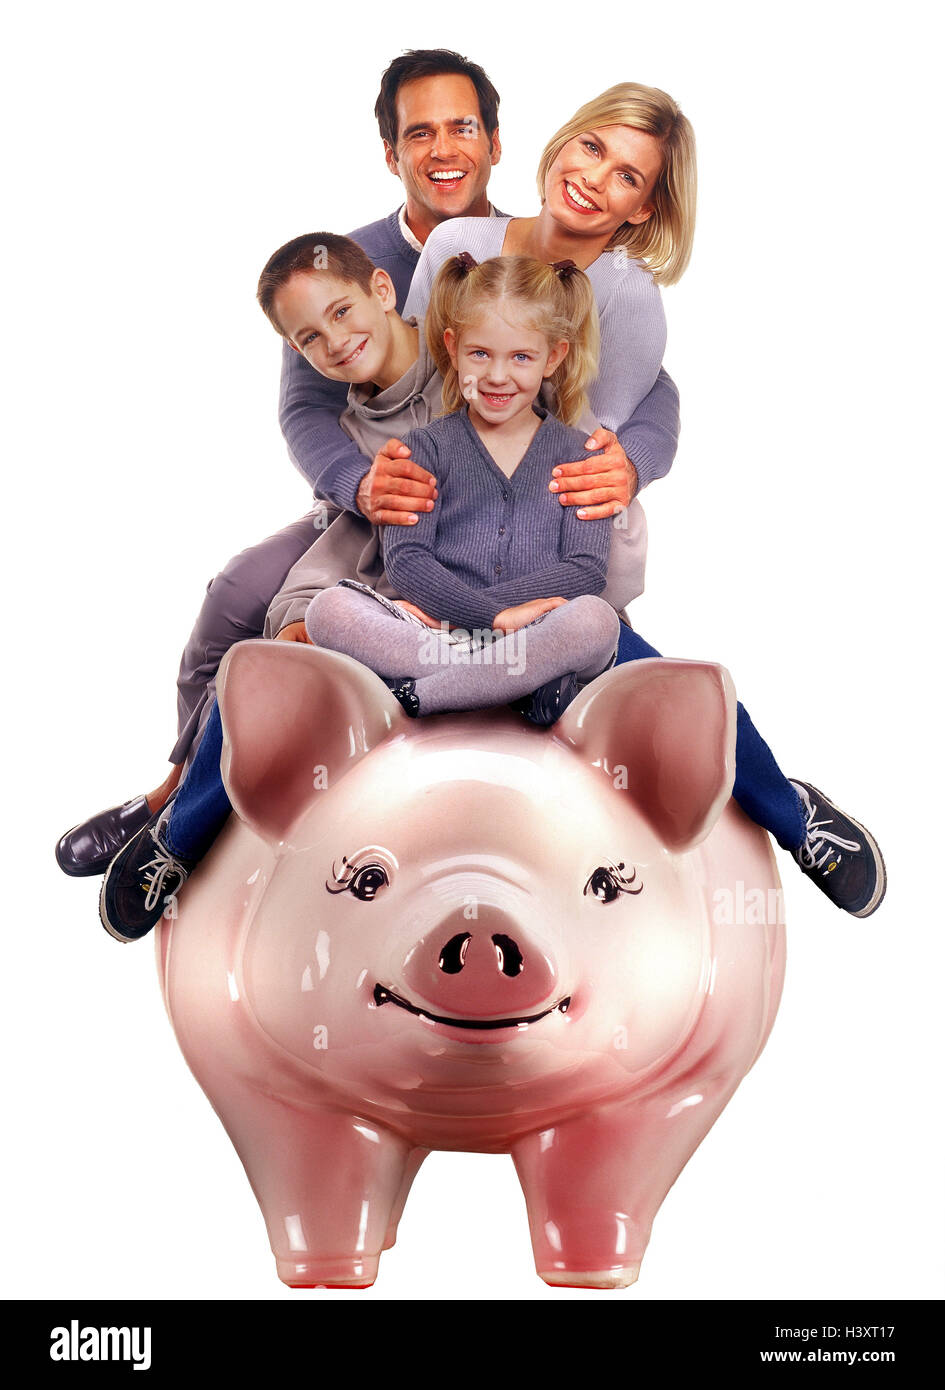 Family, piggy bank, oversized, sit, laugh Families, man, woman, parents, children, two, boy, girl, son, subsidiary, porcelain pig, 'ride', fun, leisure time, game, play, save, money, finances, plant, future, studio, cut out, Stock Photo